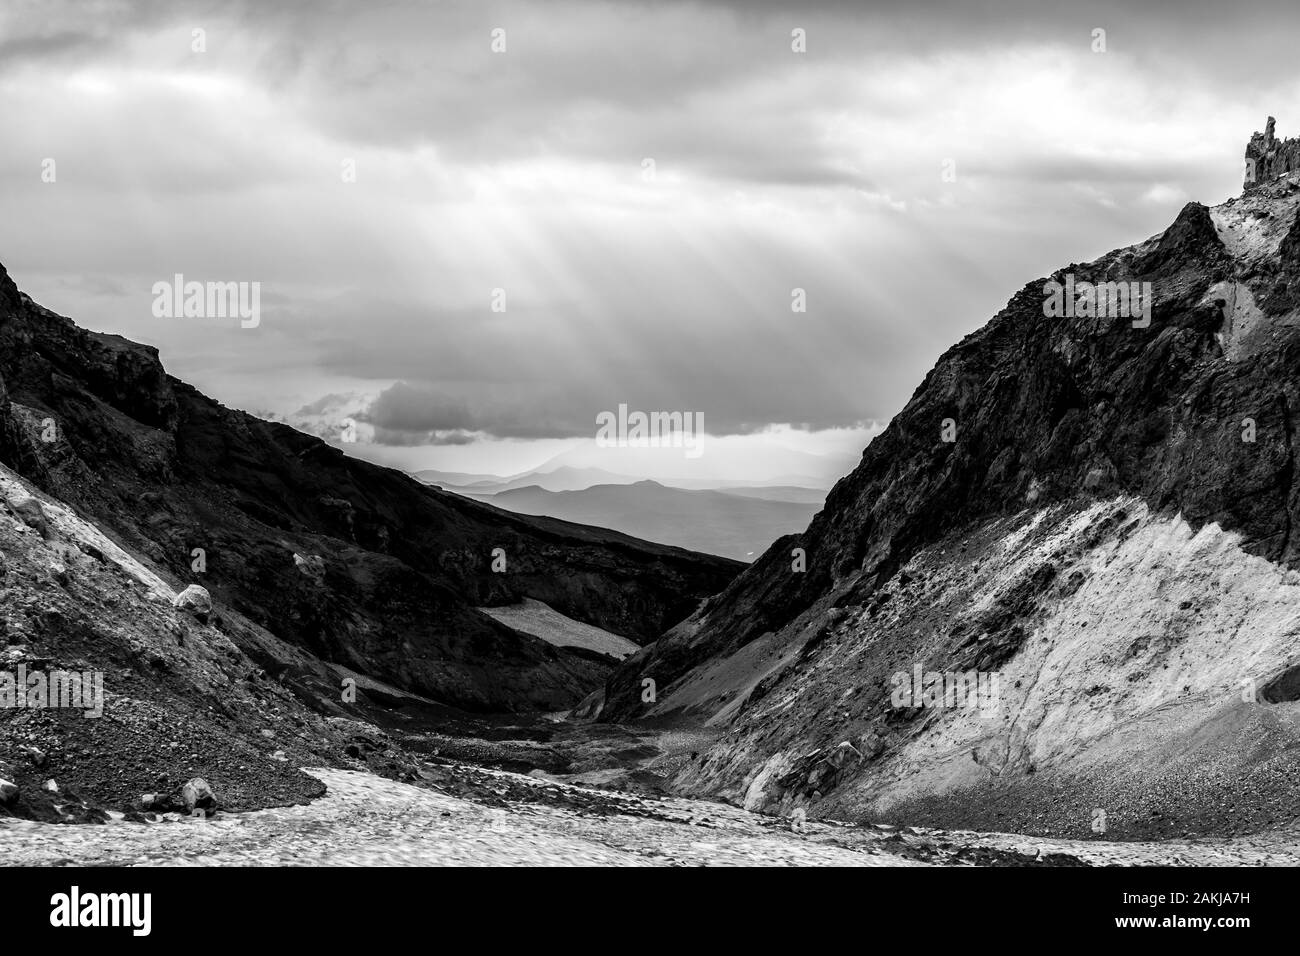 Black and white dramatic mountain landscape. The rays of the sun breaking through the clouds. Stock Photo